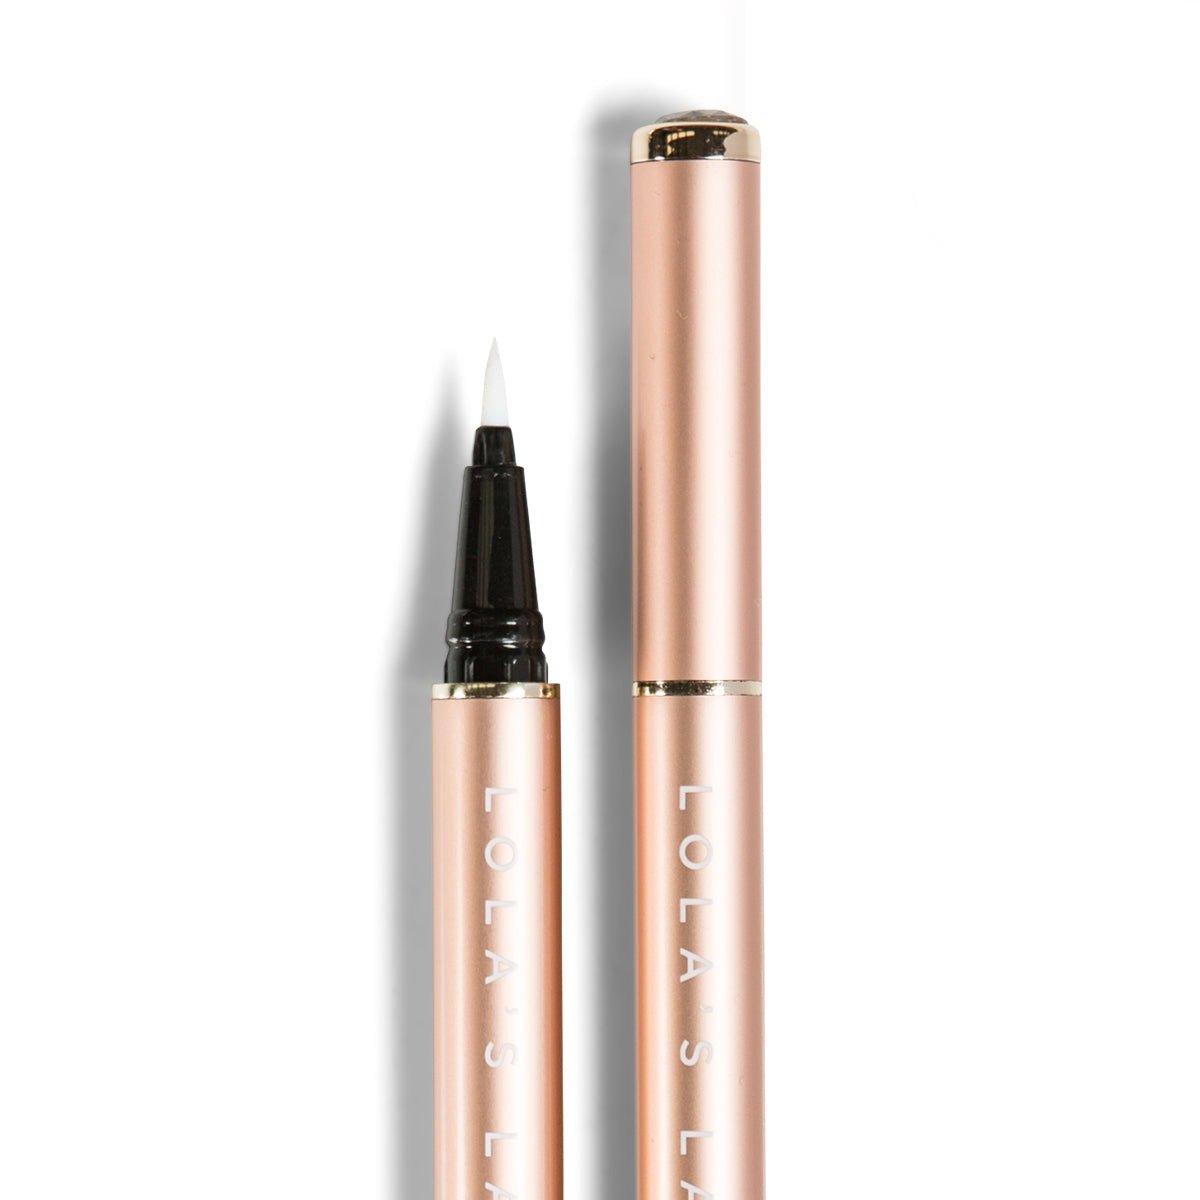 Flick and Stick Adhesive Eyeliner Precision Pen - Clear - Lola's Lashes